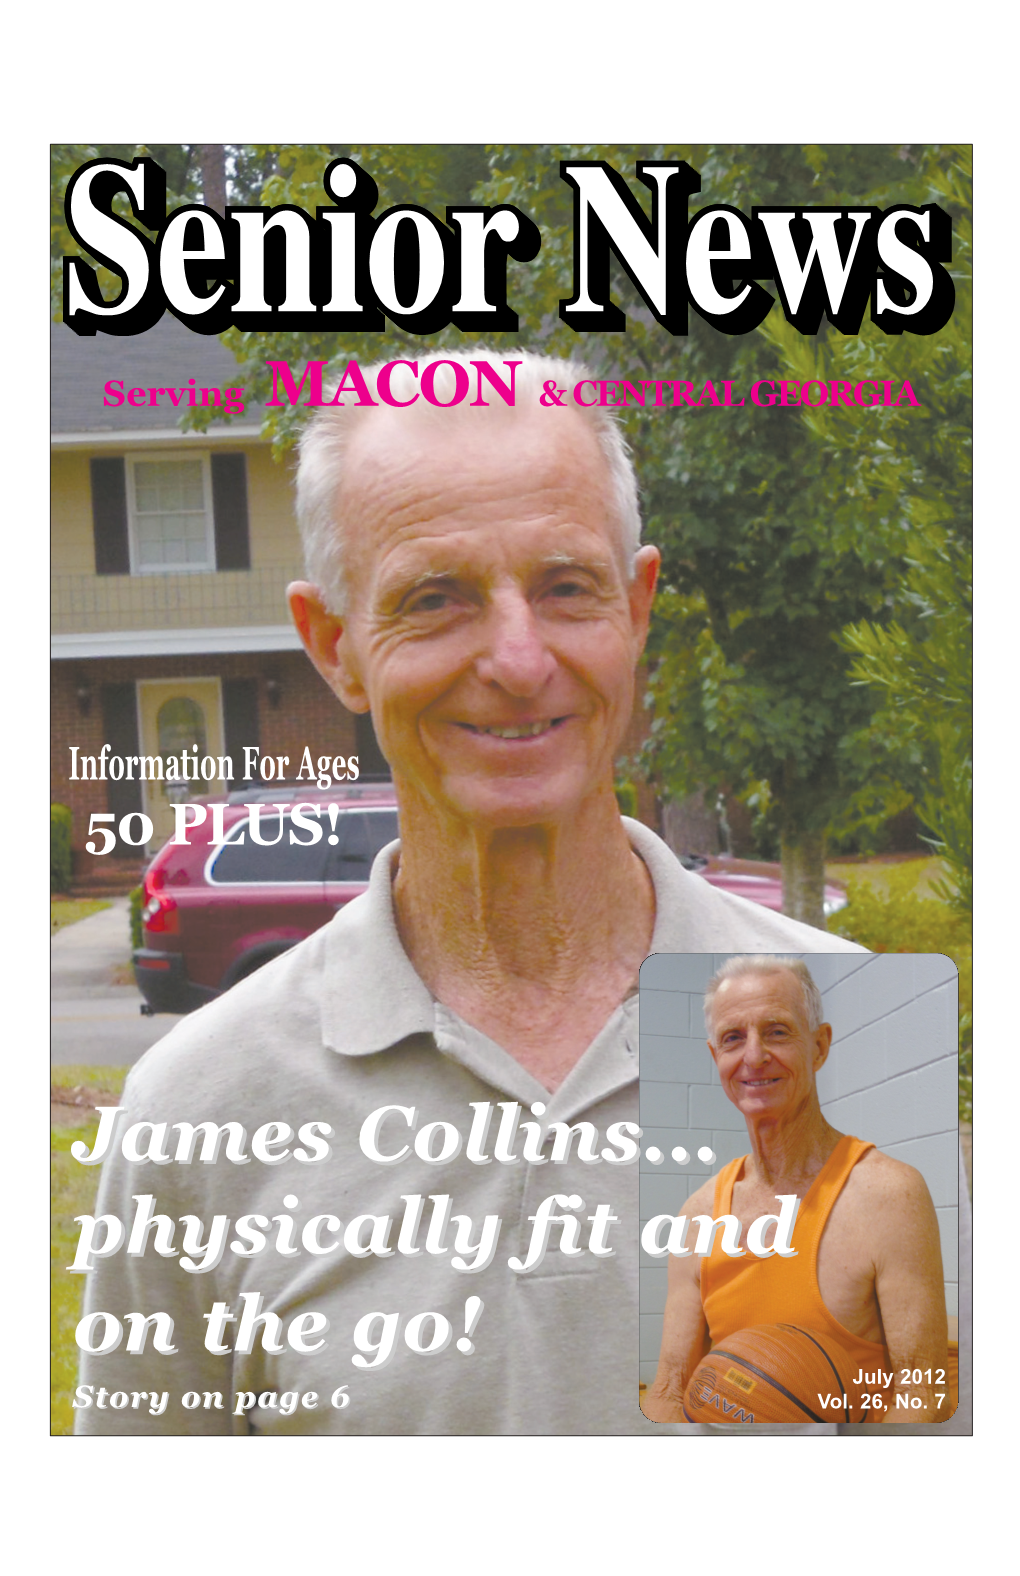 James Collins... Physically Fit and on the Go! by JANE WINSTON Banana, Something Sweet, and a Cup of Thompson Who Is 80 Years Young